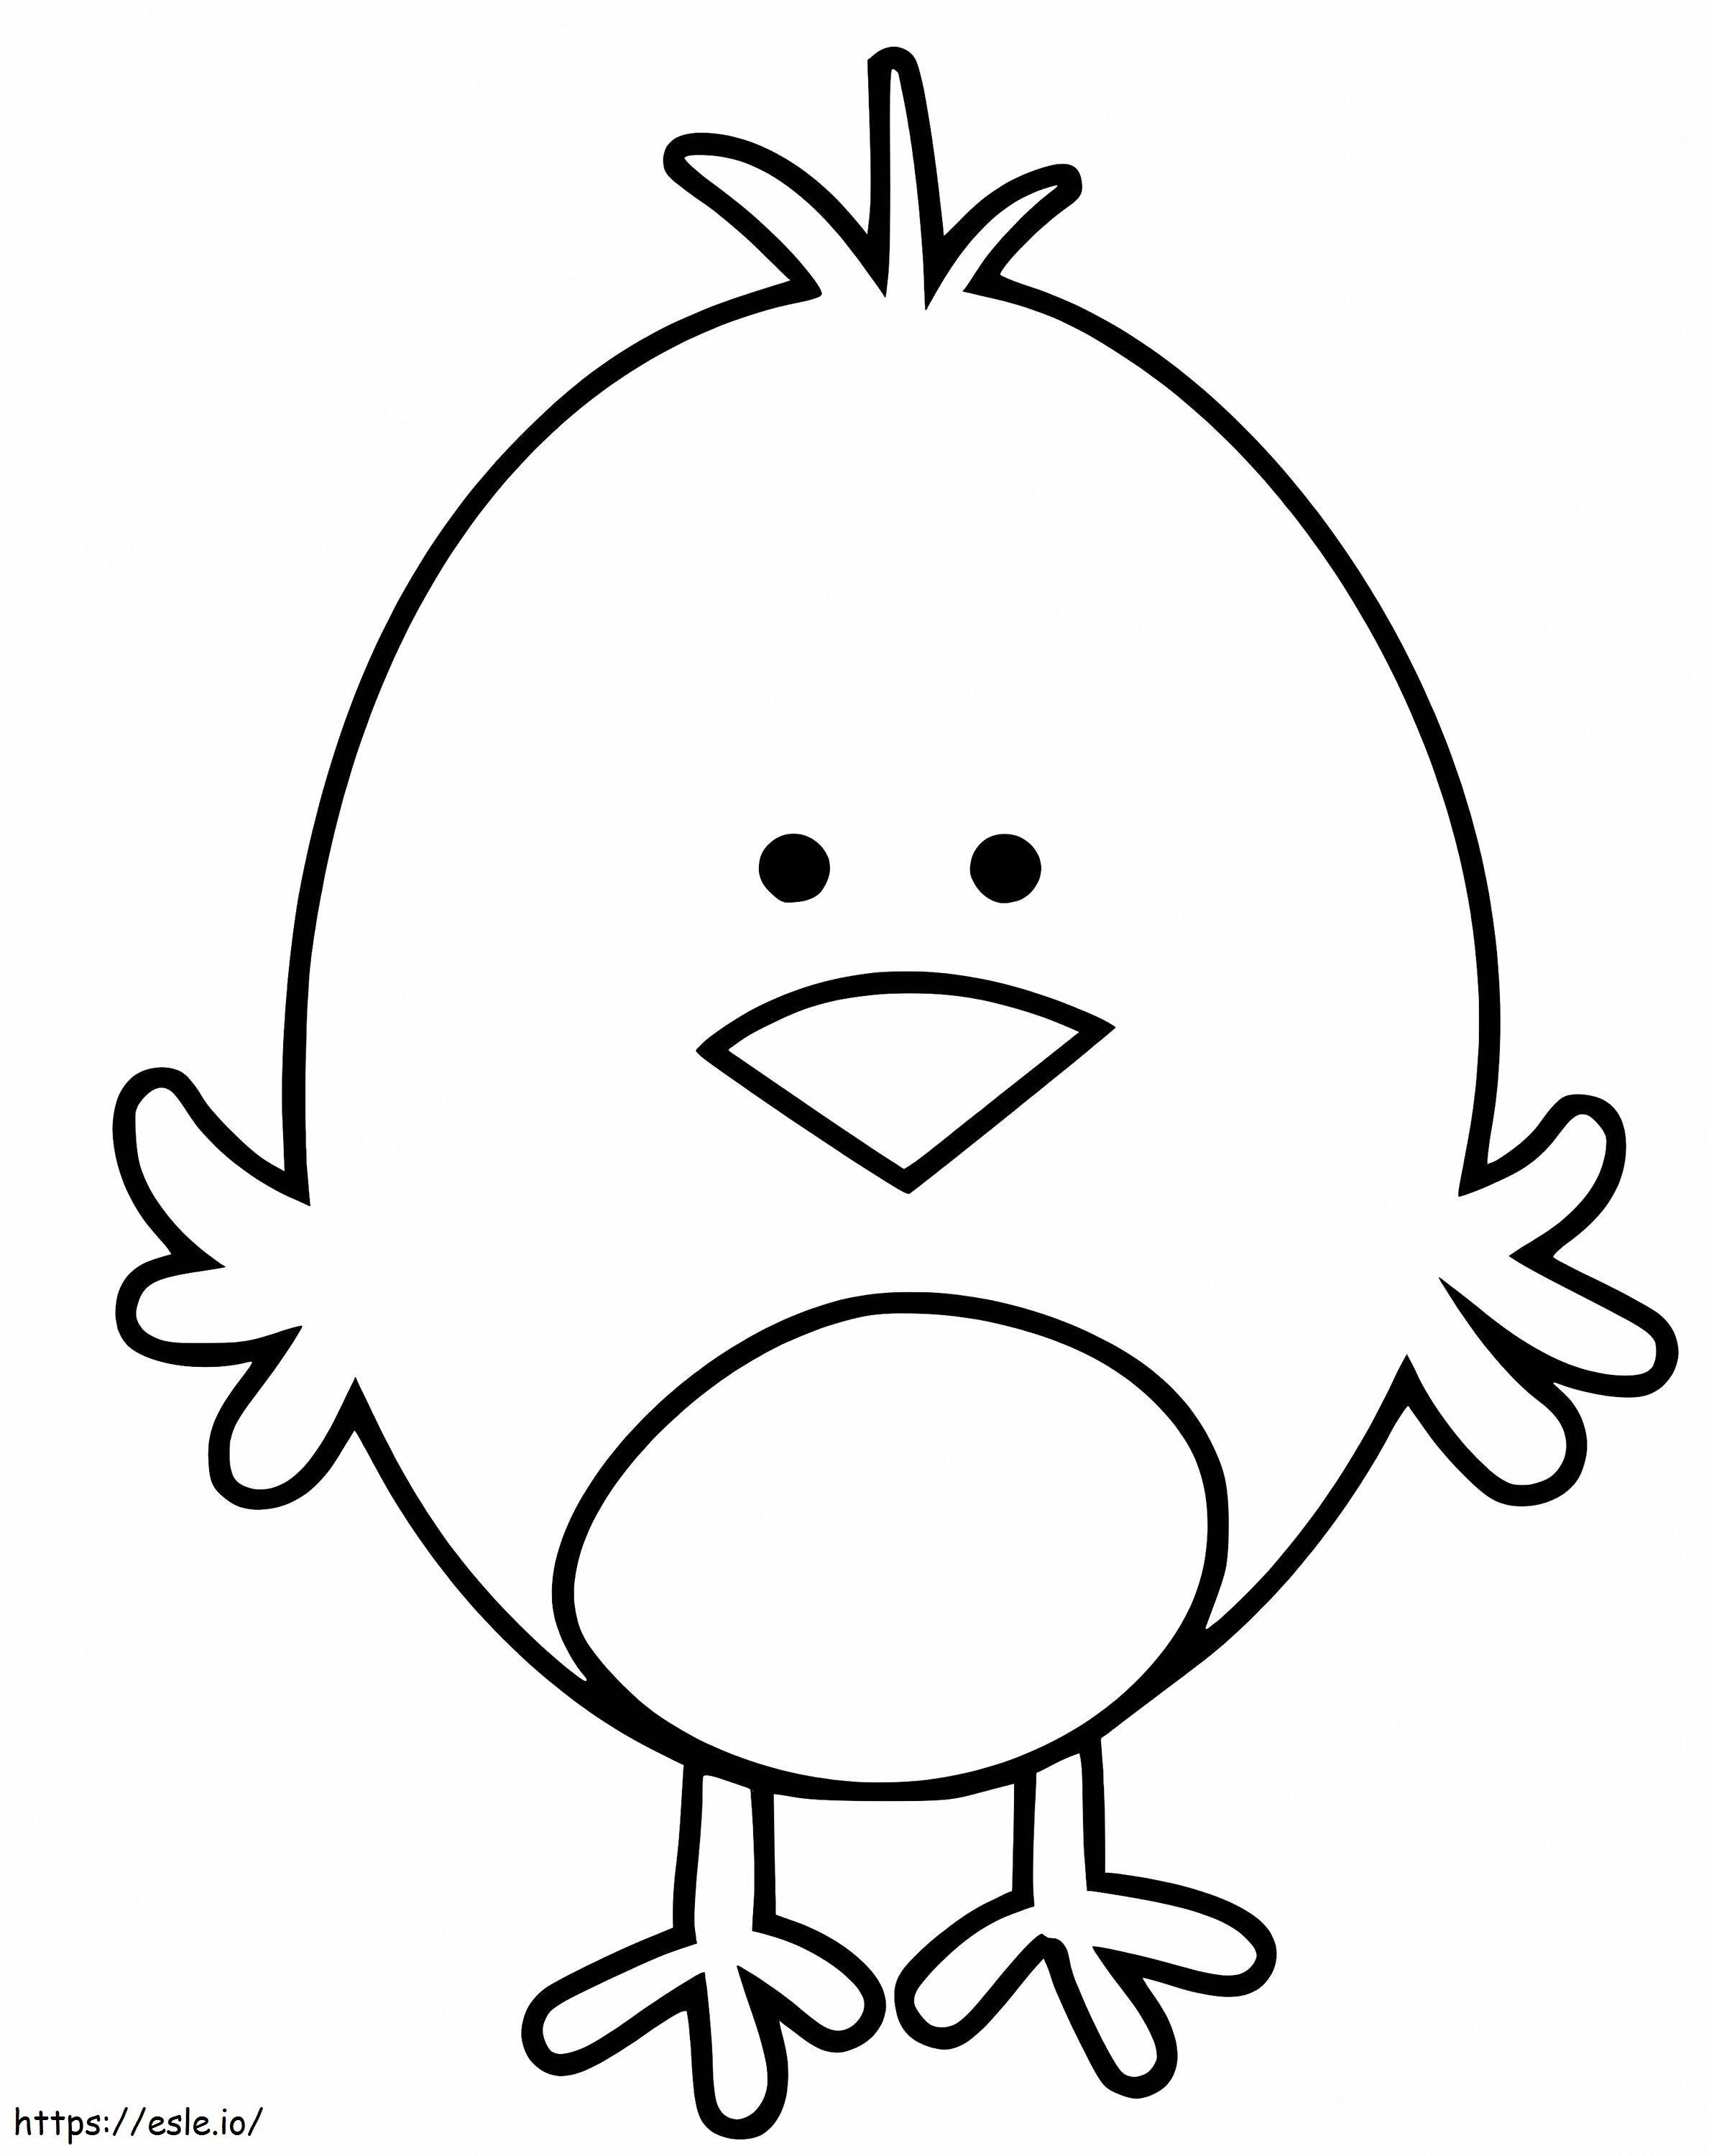 Cute Little Bird coloring page